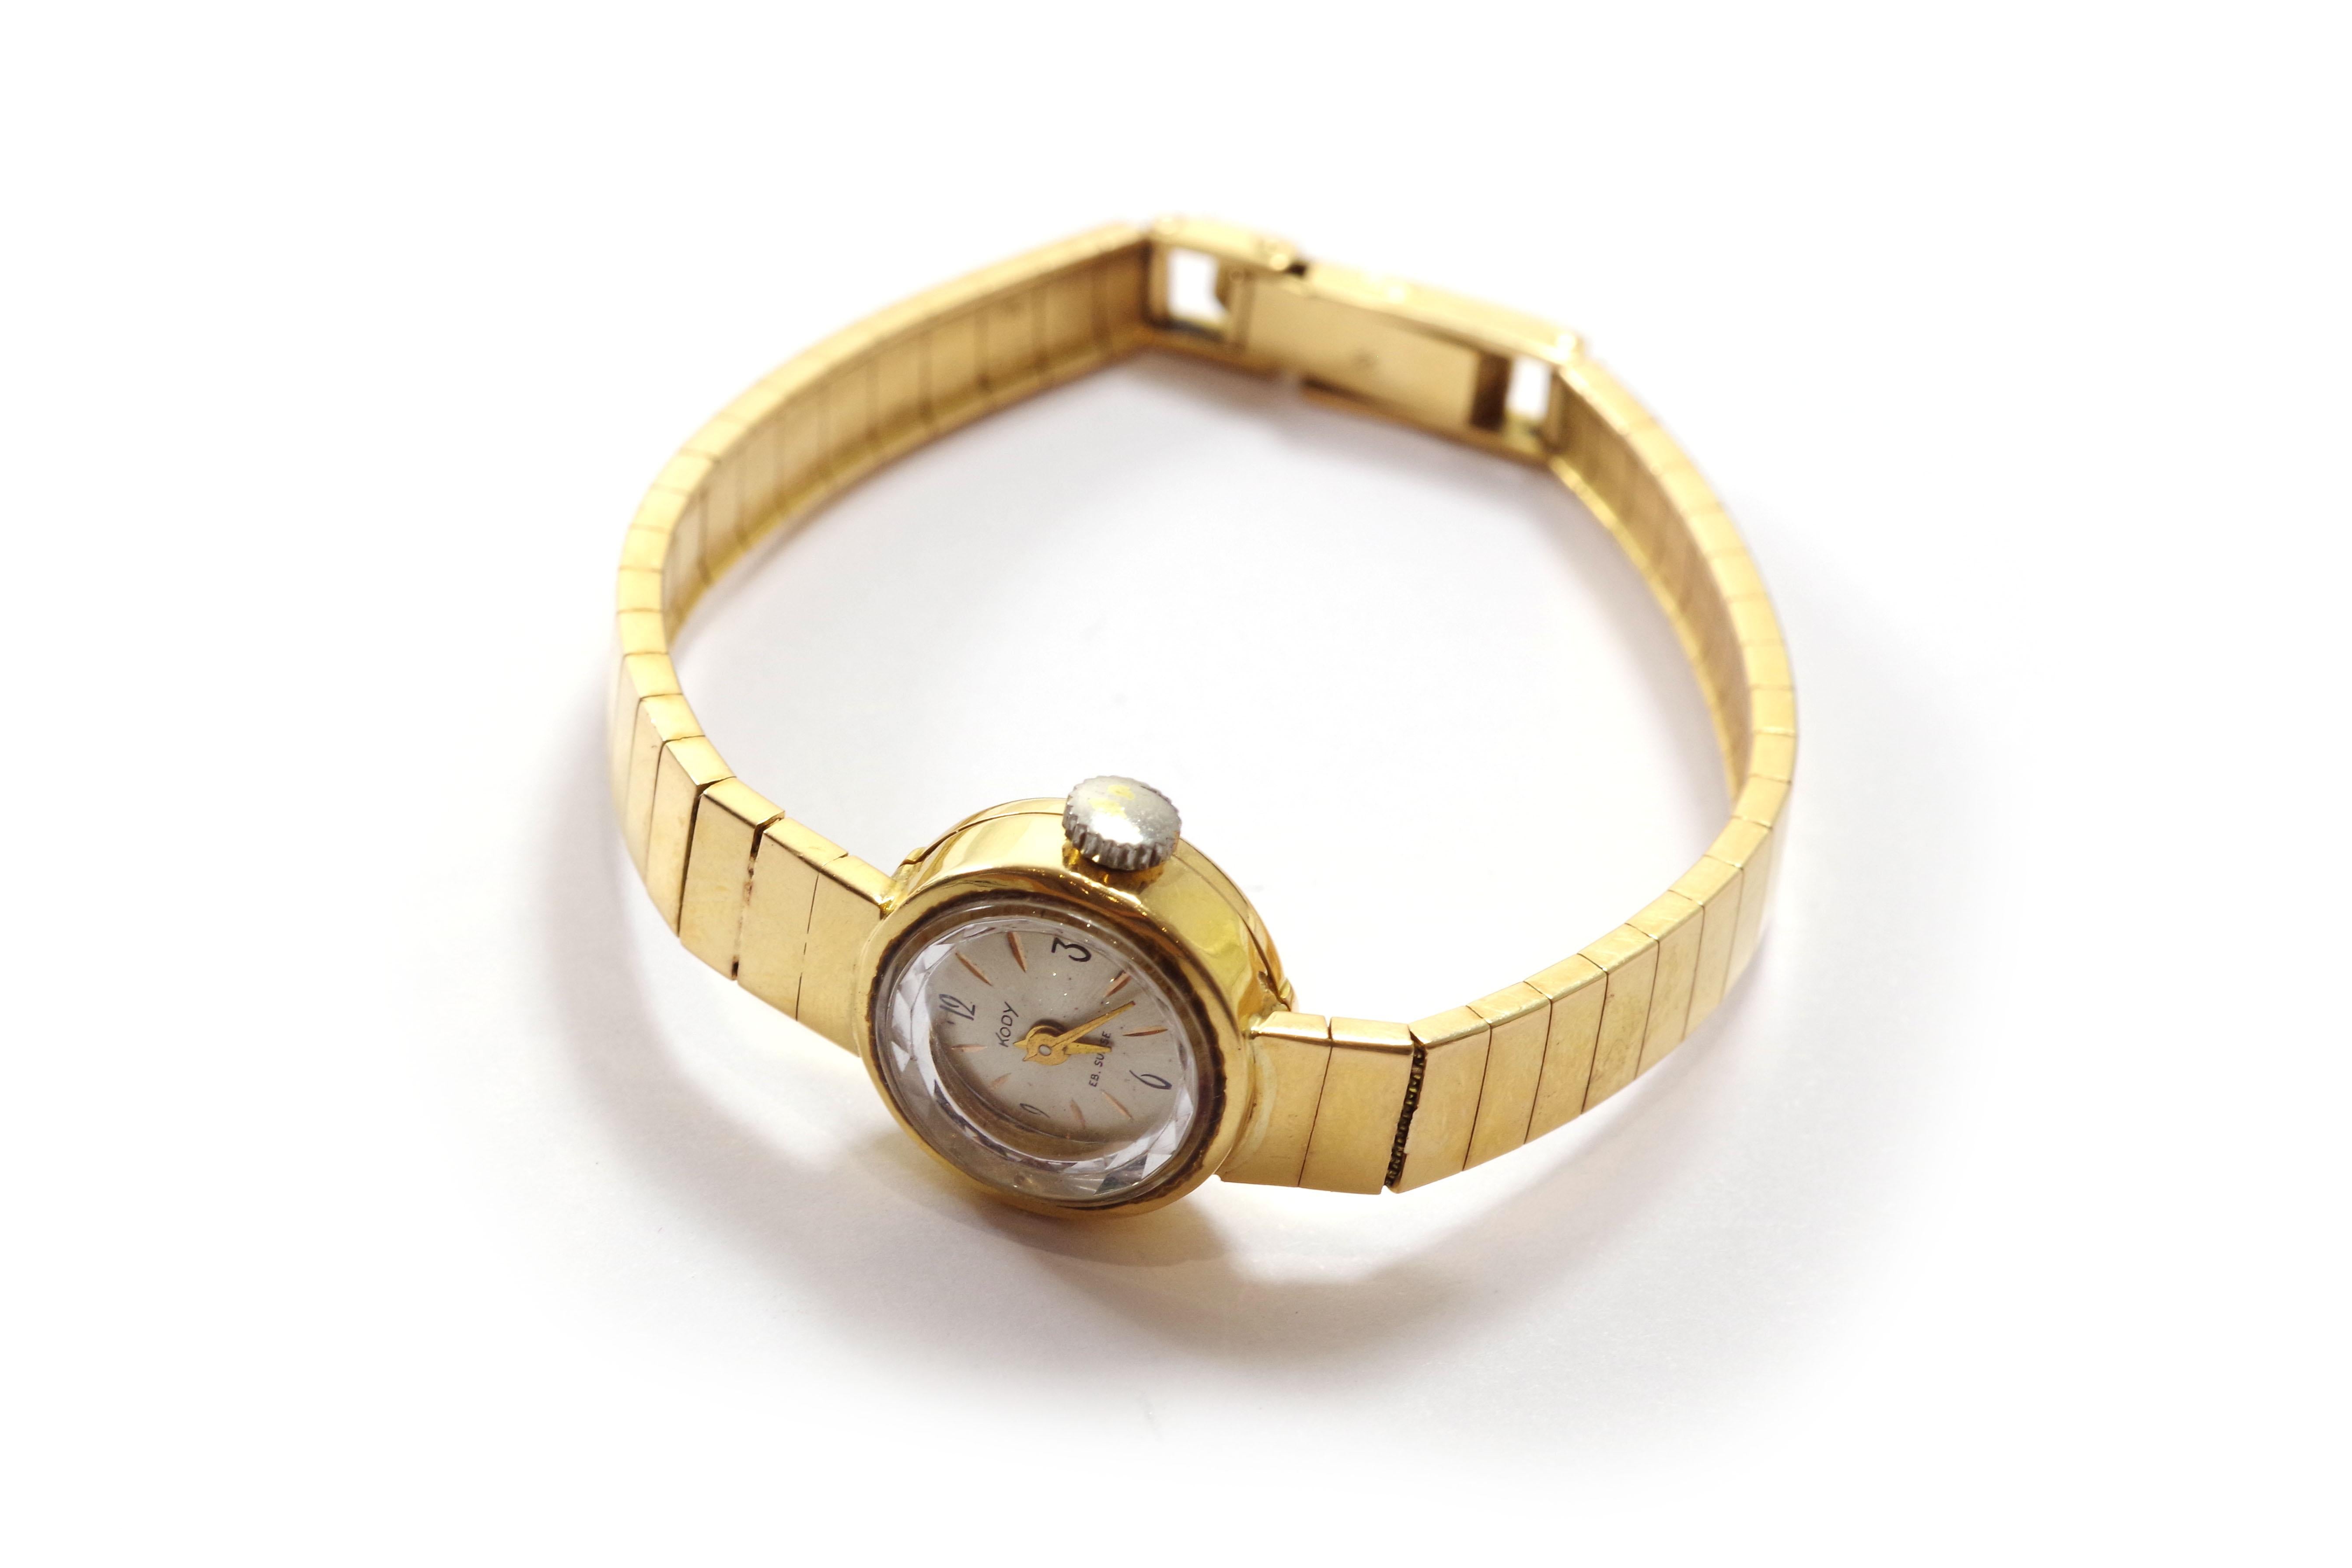 Lady Kody gold watch in 18k yellow gold. This lady's watch features a round case with a bracelet consisting of rectangular articulated links. The dial is cream-colored enamel, and the hands are gold-toned. The movement is a manual winding mechanical